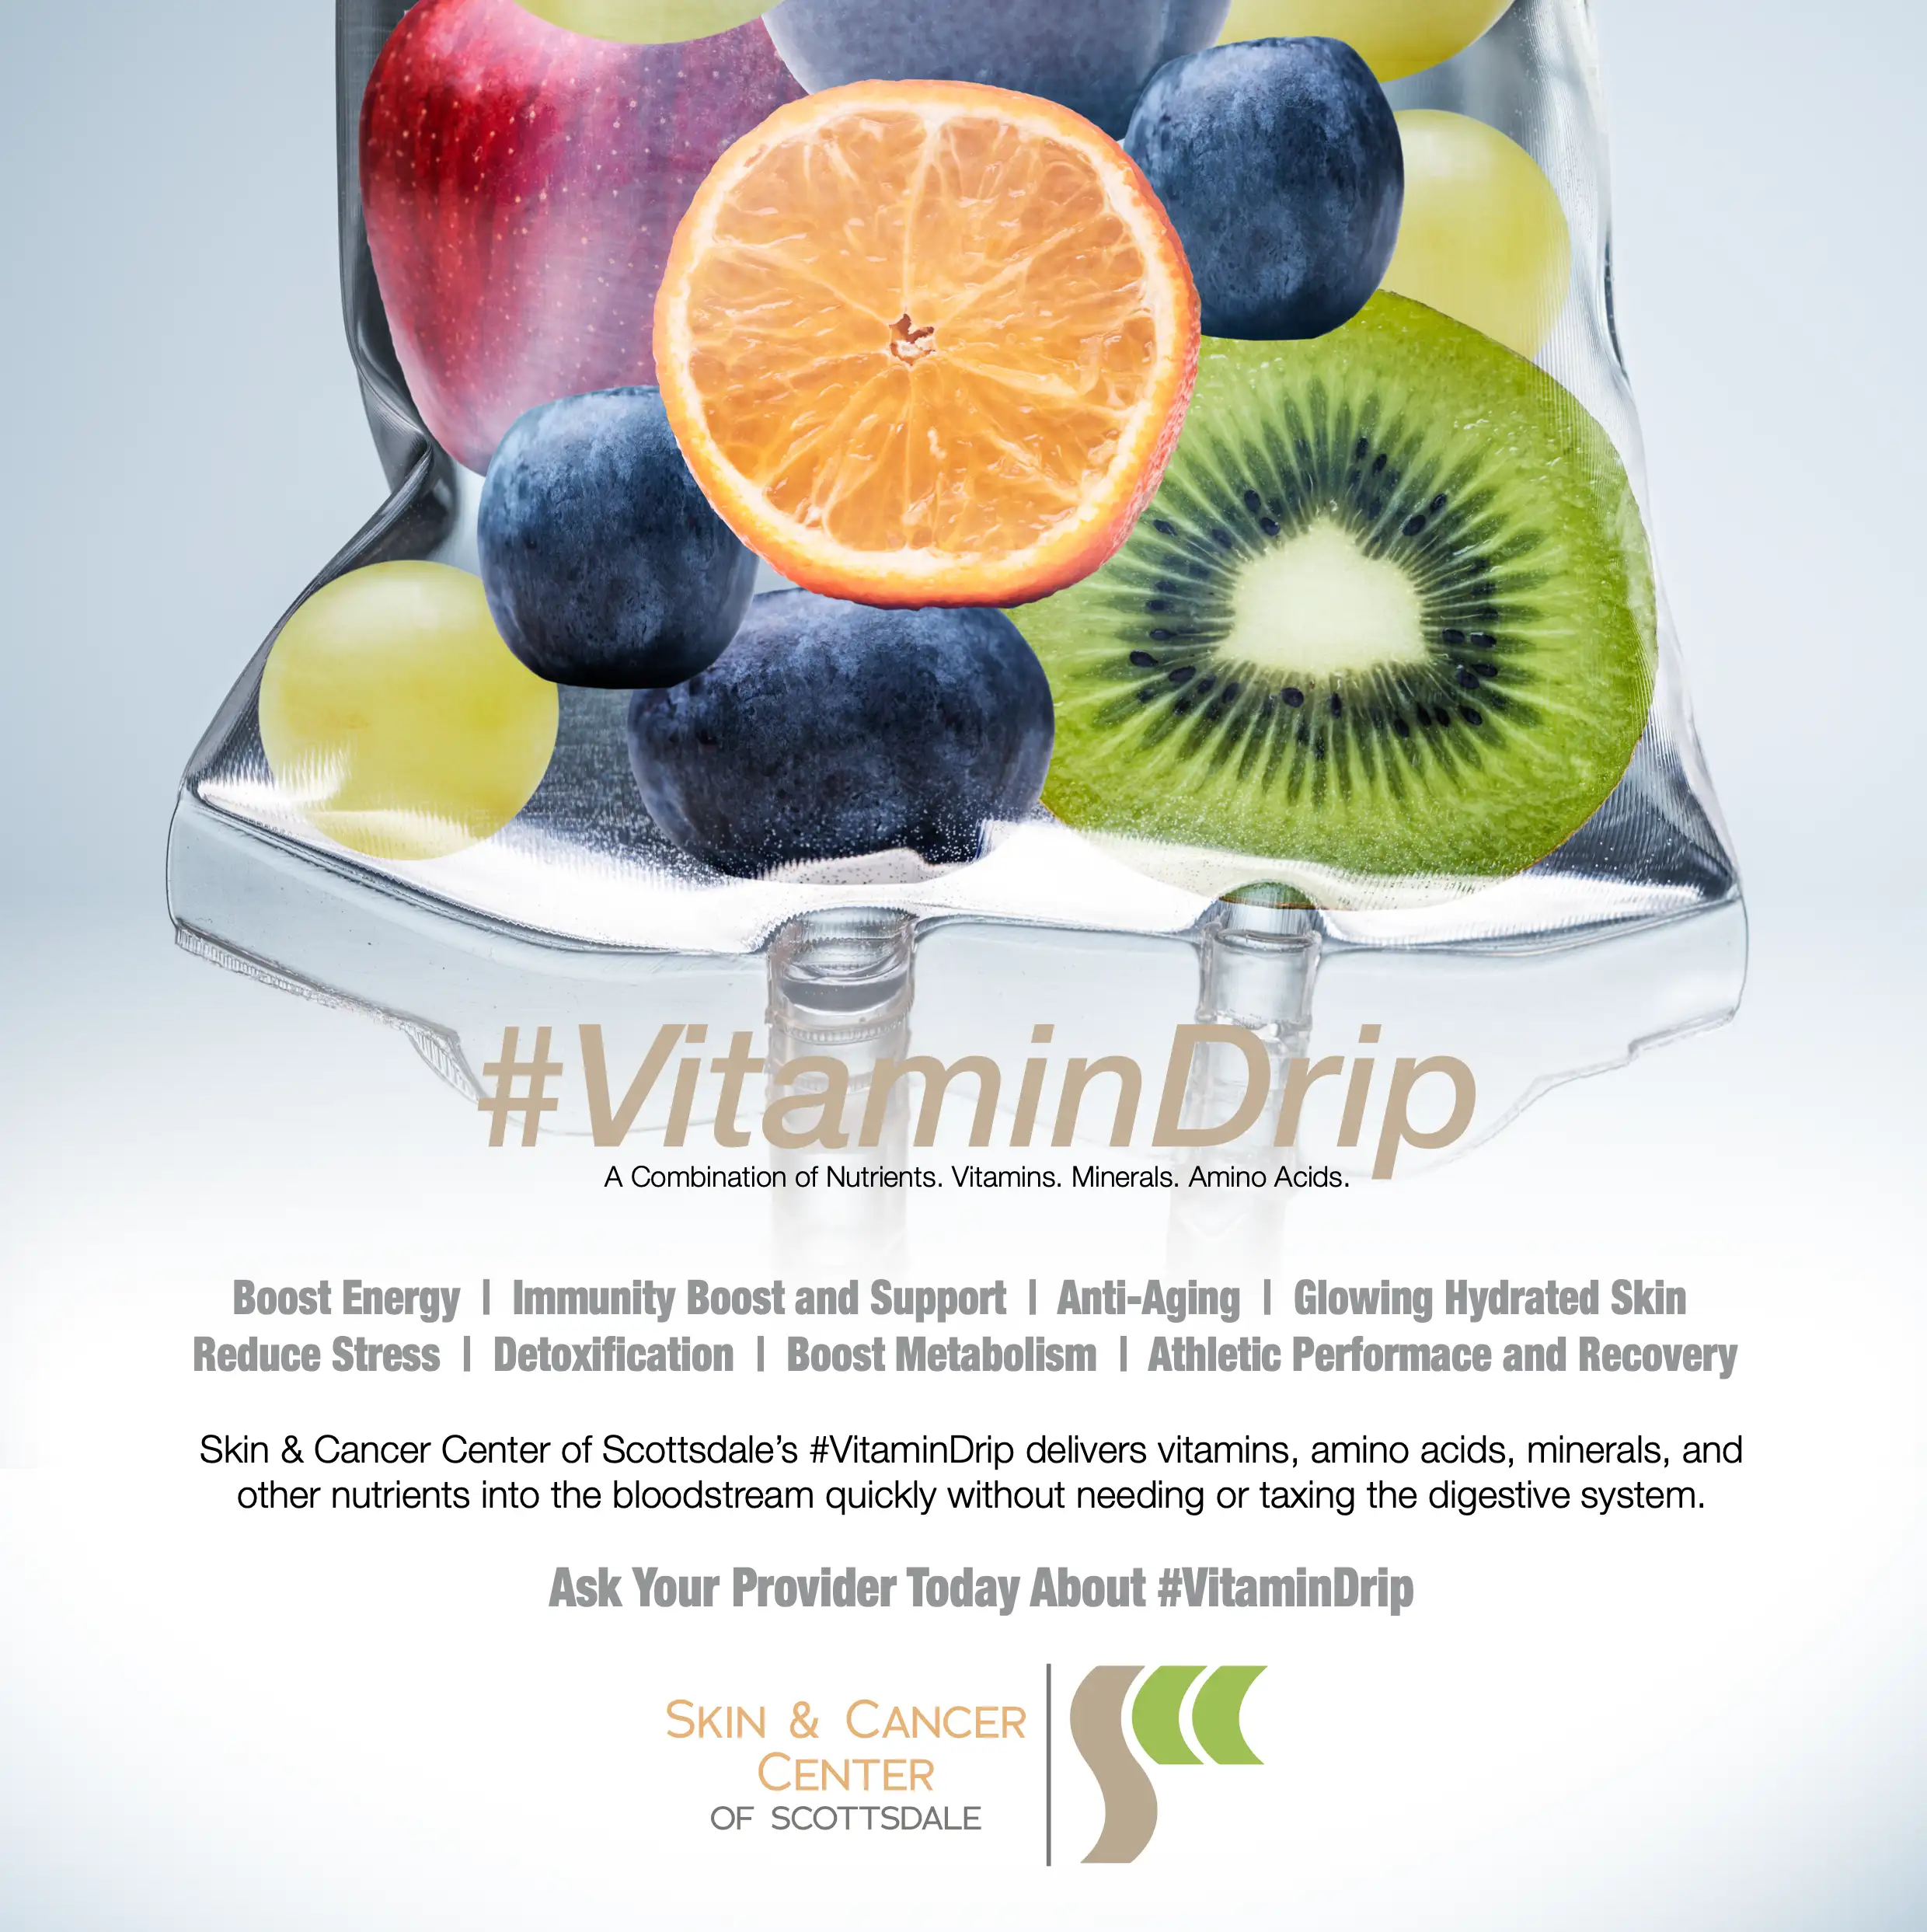 Poster #VitaminDrip A Combination of Nutrients, Vitamins, Minerals and Amino Acids.